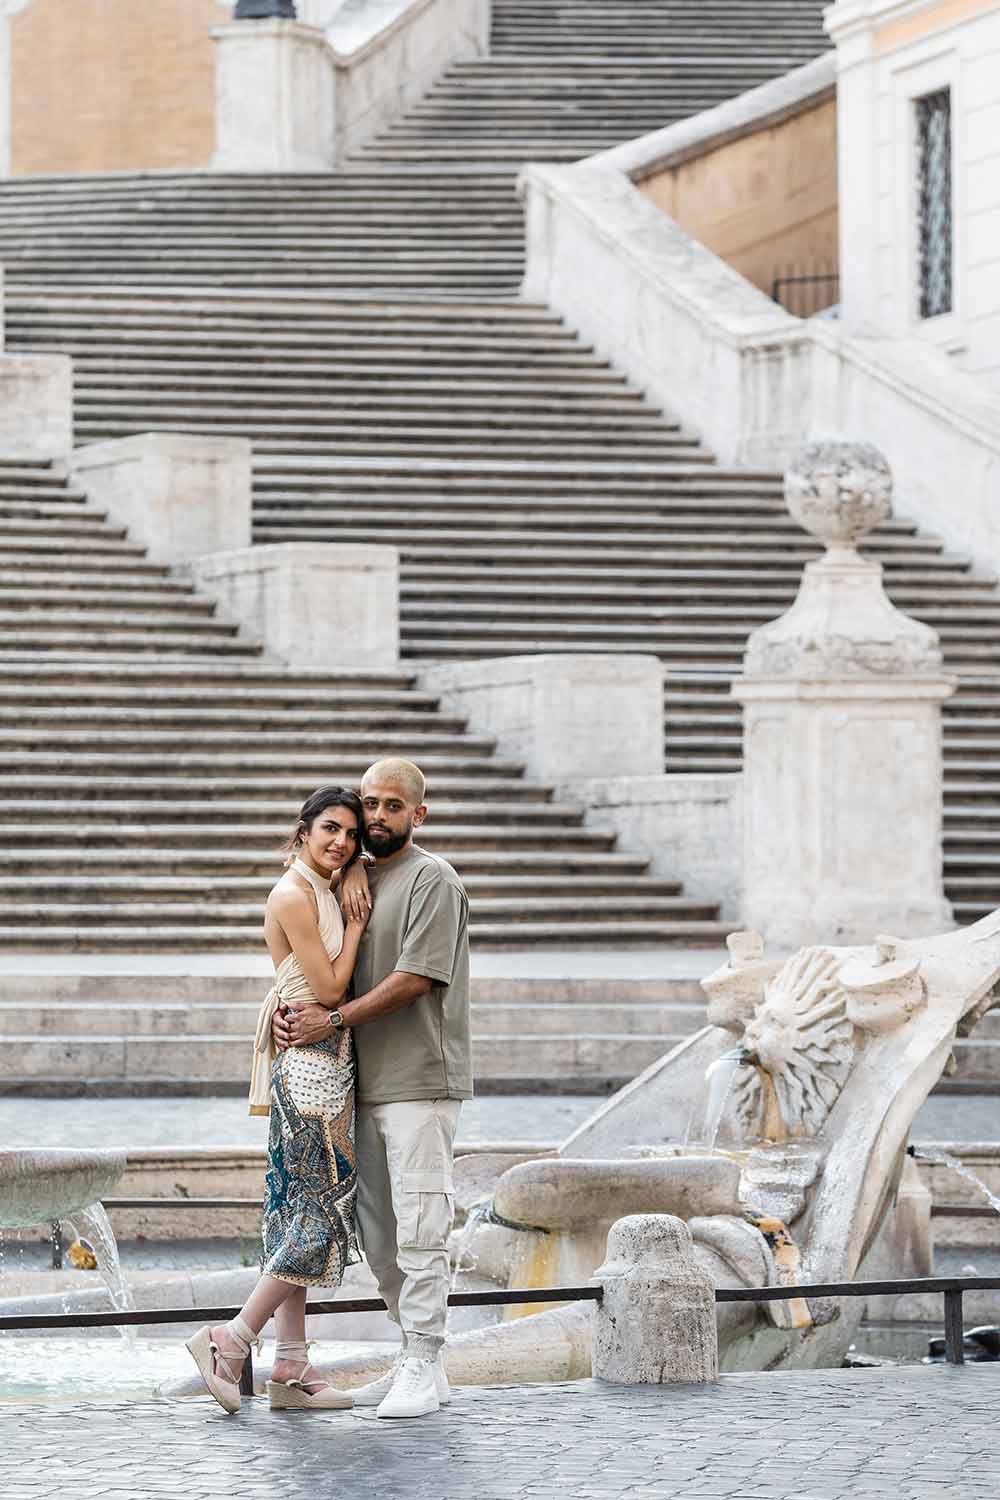 Posed portrait with the beautiful Spanish steps staircase in the background creating interesting geometrical effects